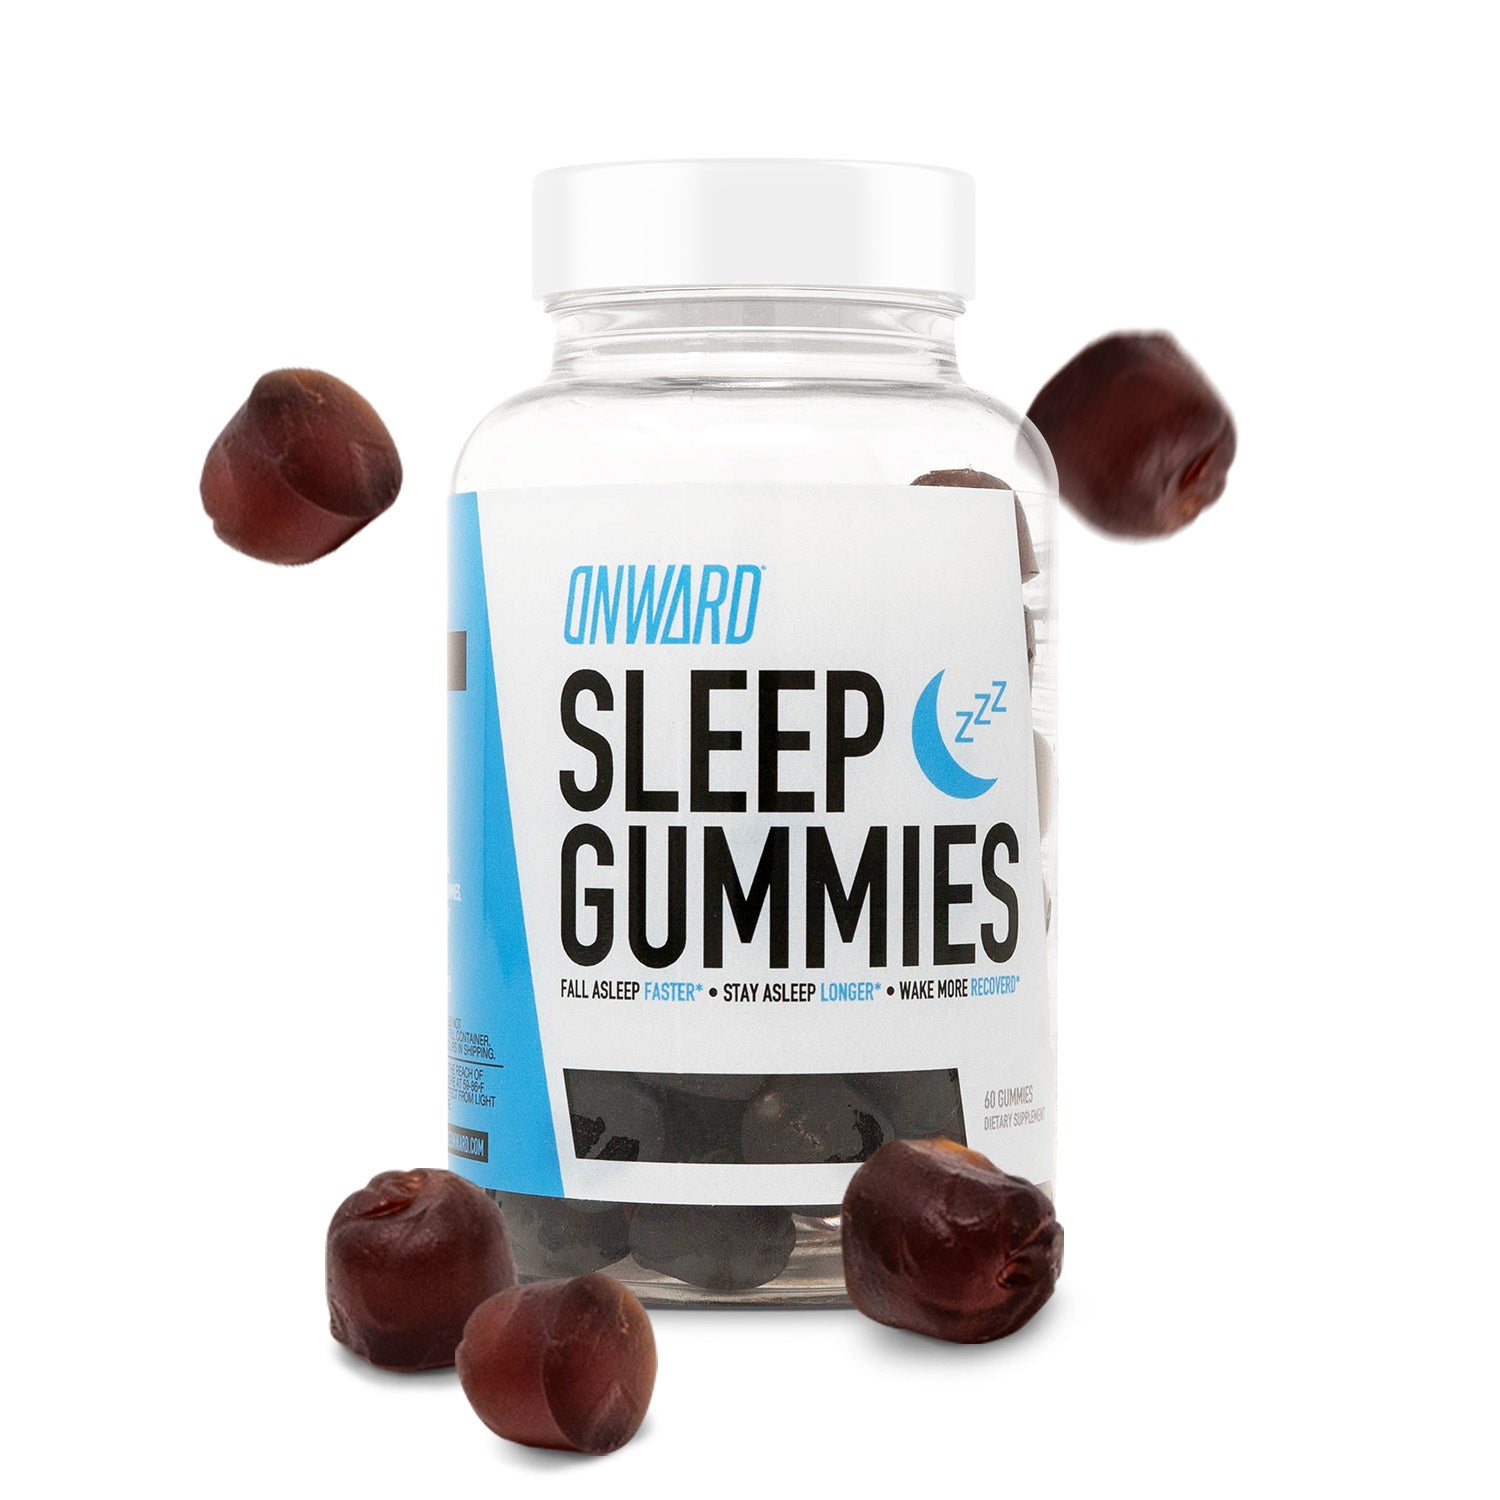 A clear bottle of Sleep Gummies. The gummies in side are gumdrop shaped and a deep purple color.